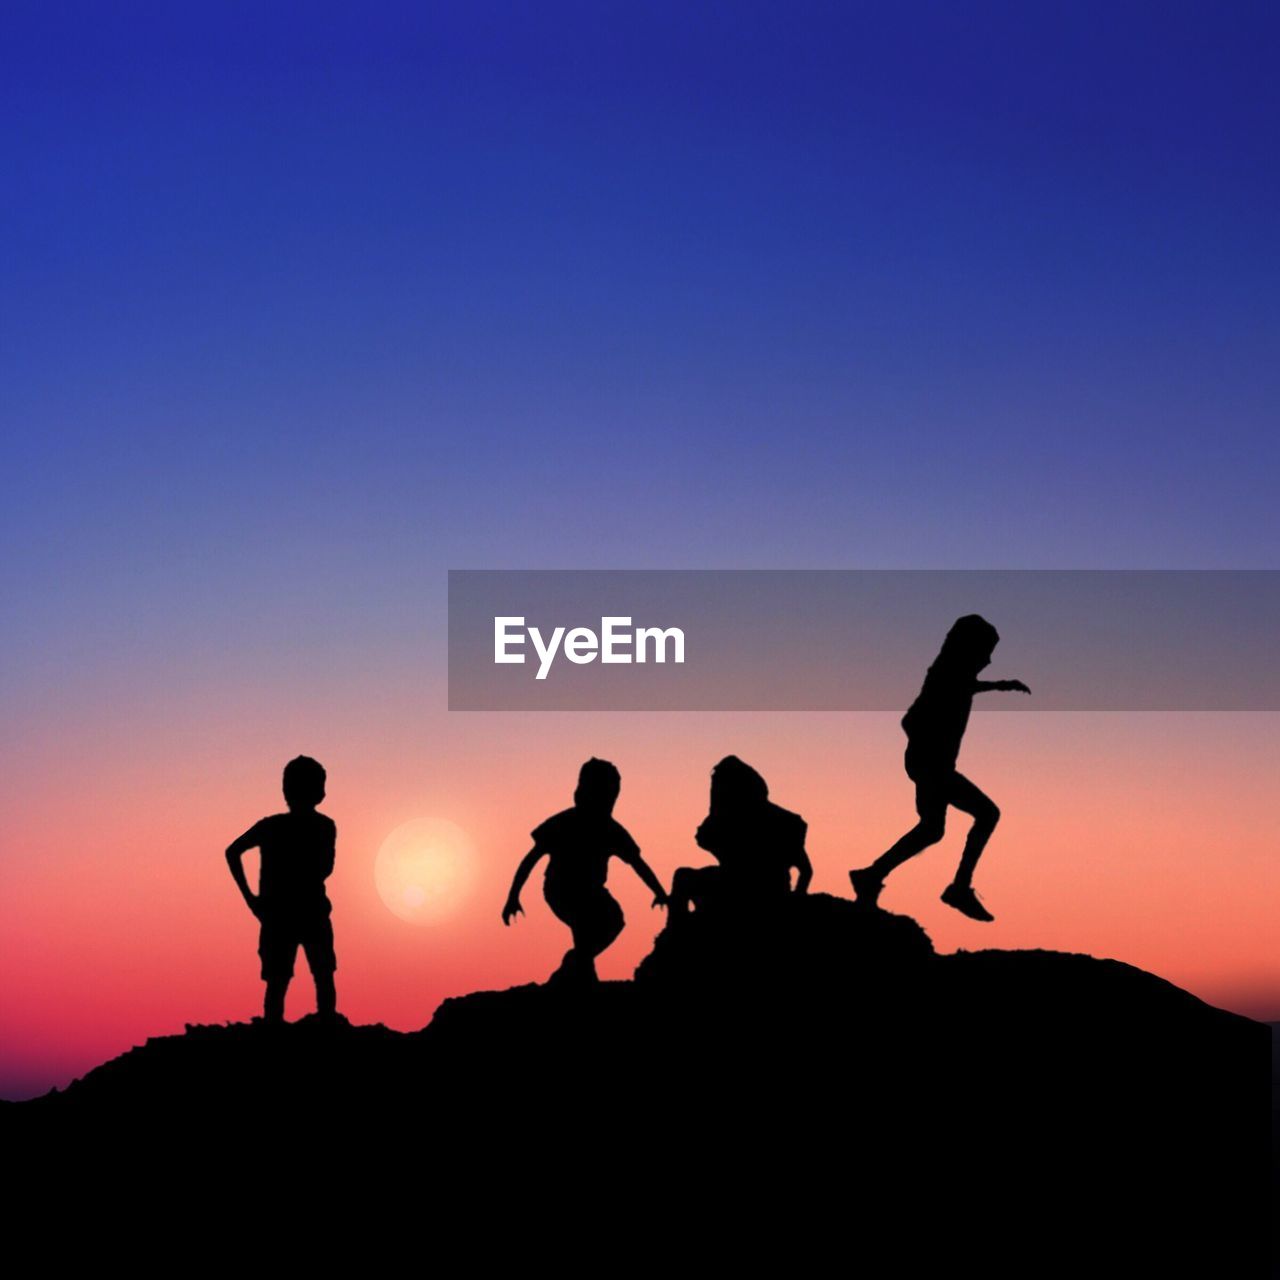 Silhouette children playing on rock against blue sky during sunset